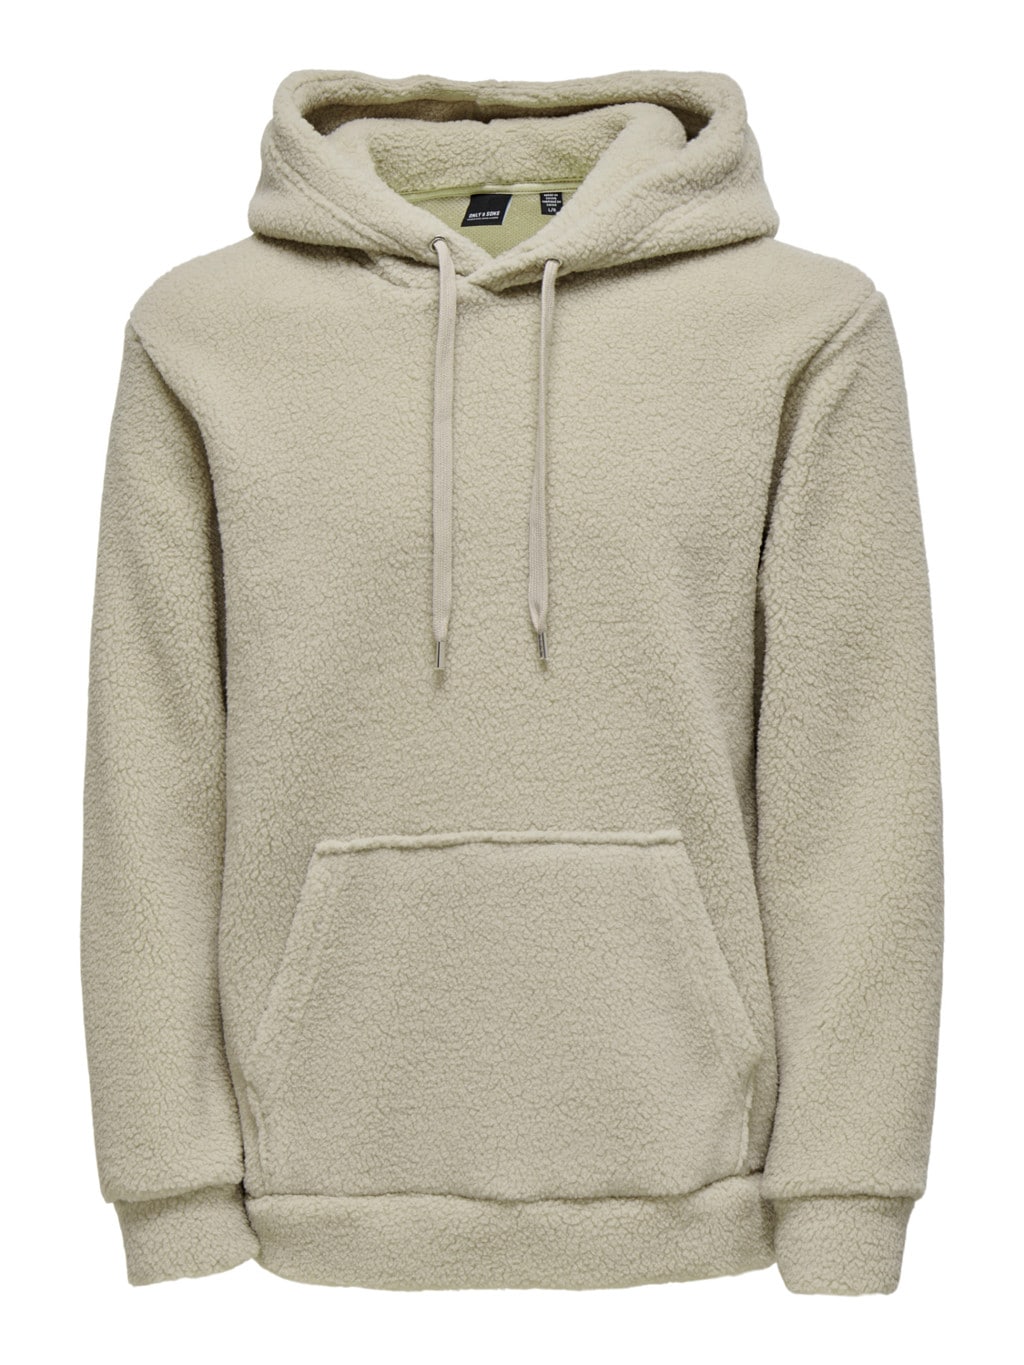 Buy Only & Sons Remy Teddy Hoodie Grey - Scandinavian Fashion Store